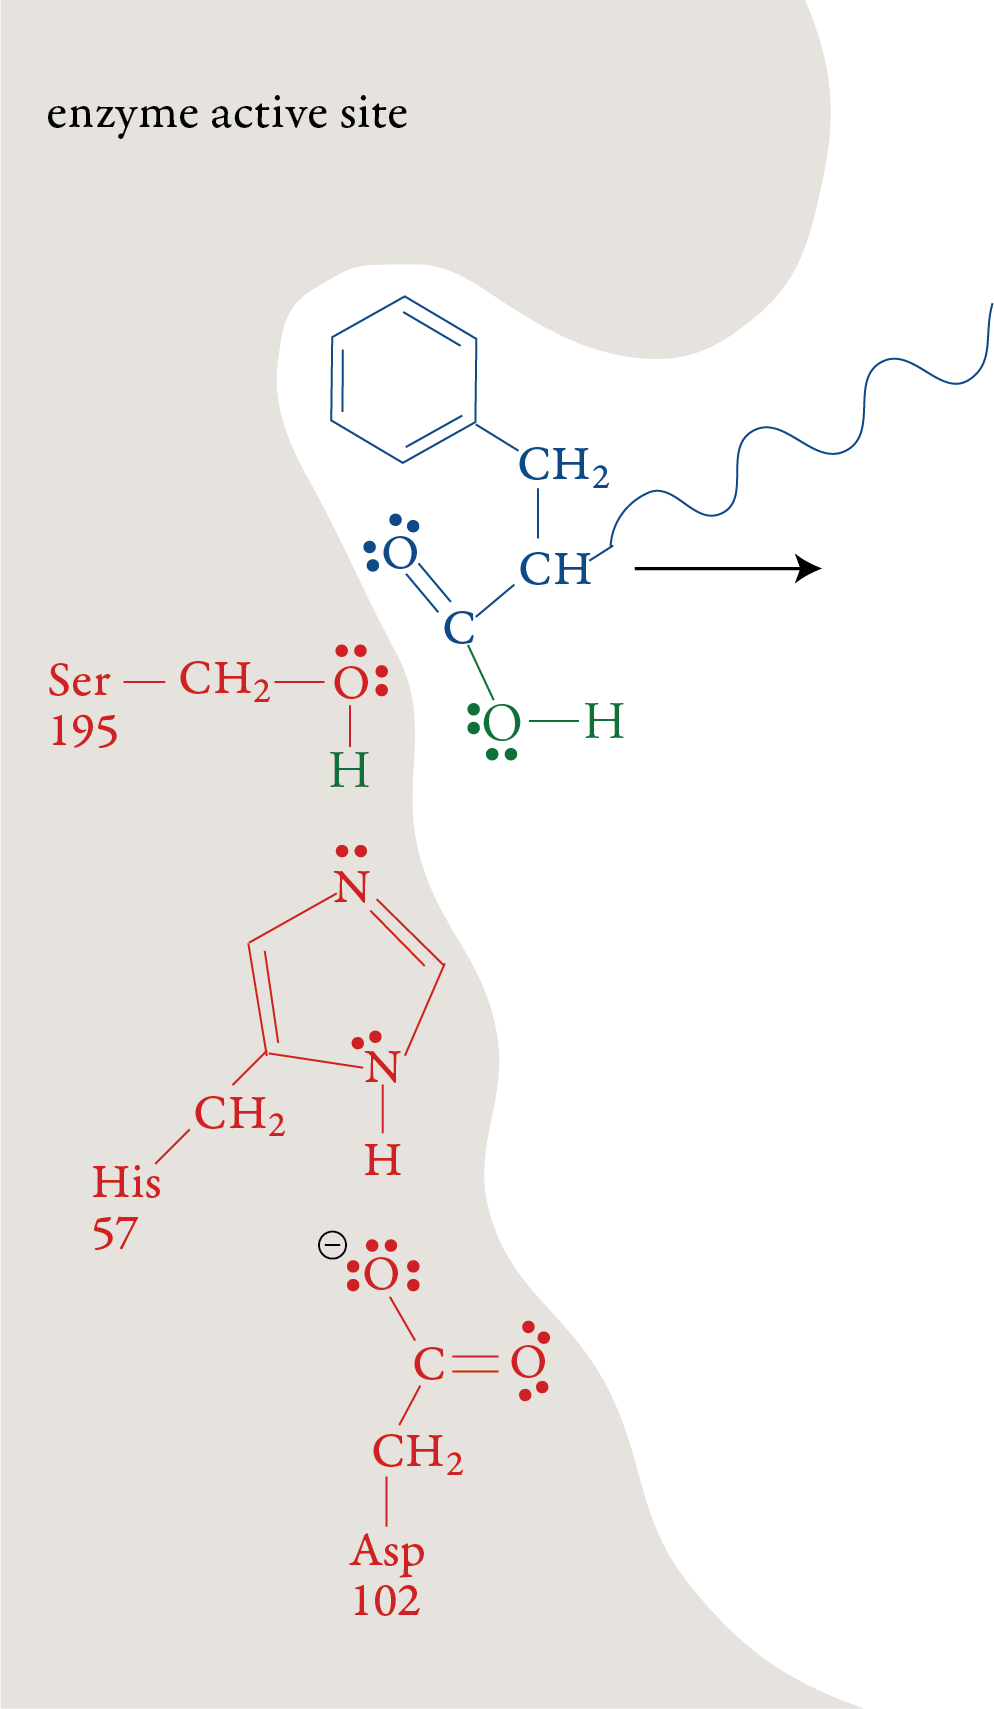 Image of the sixth step in the chymotrypsin mechanism